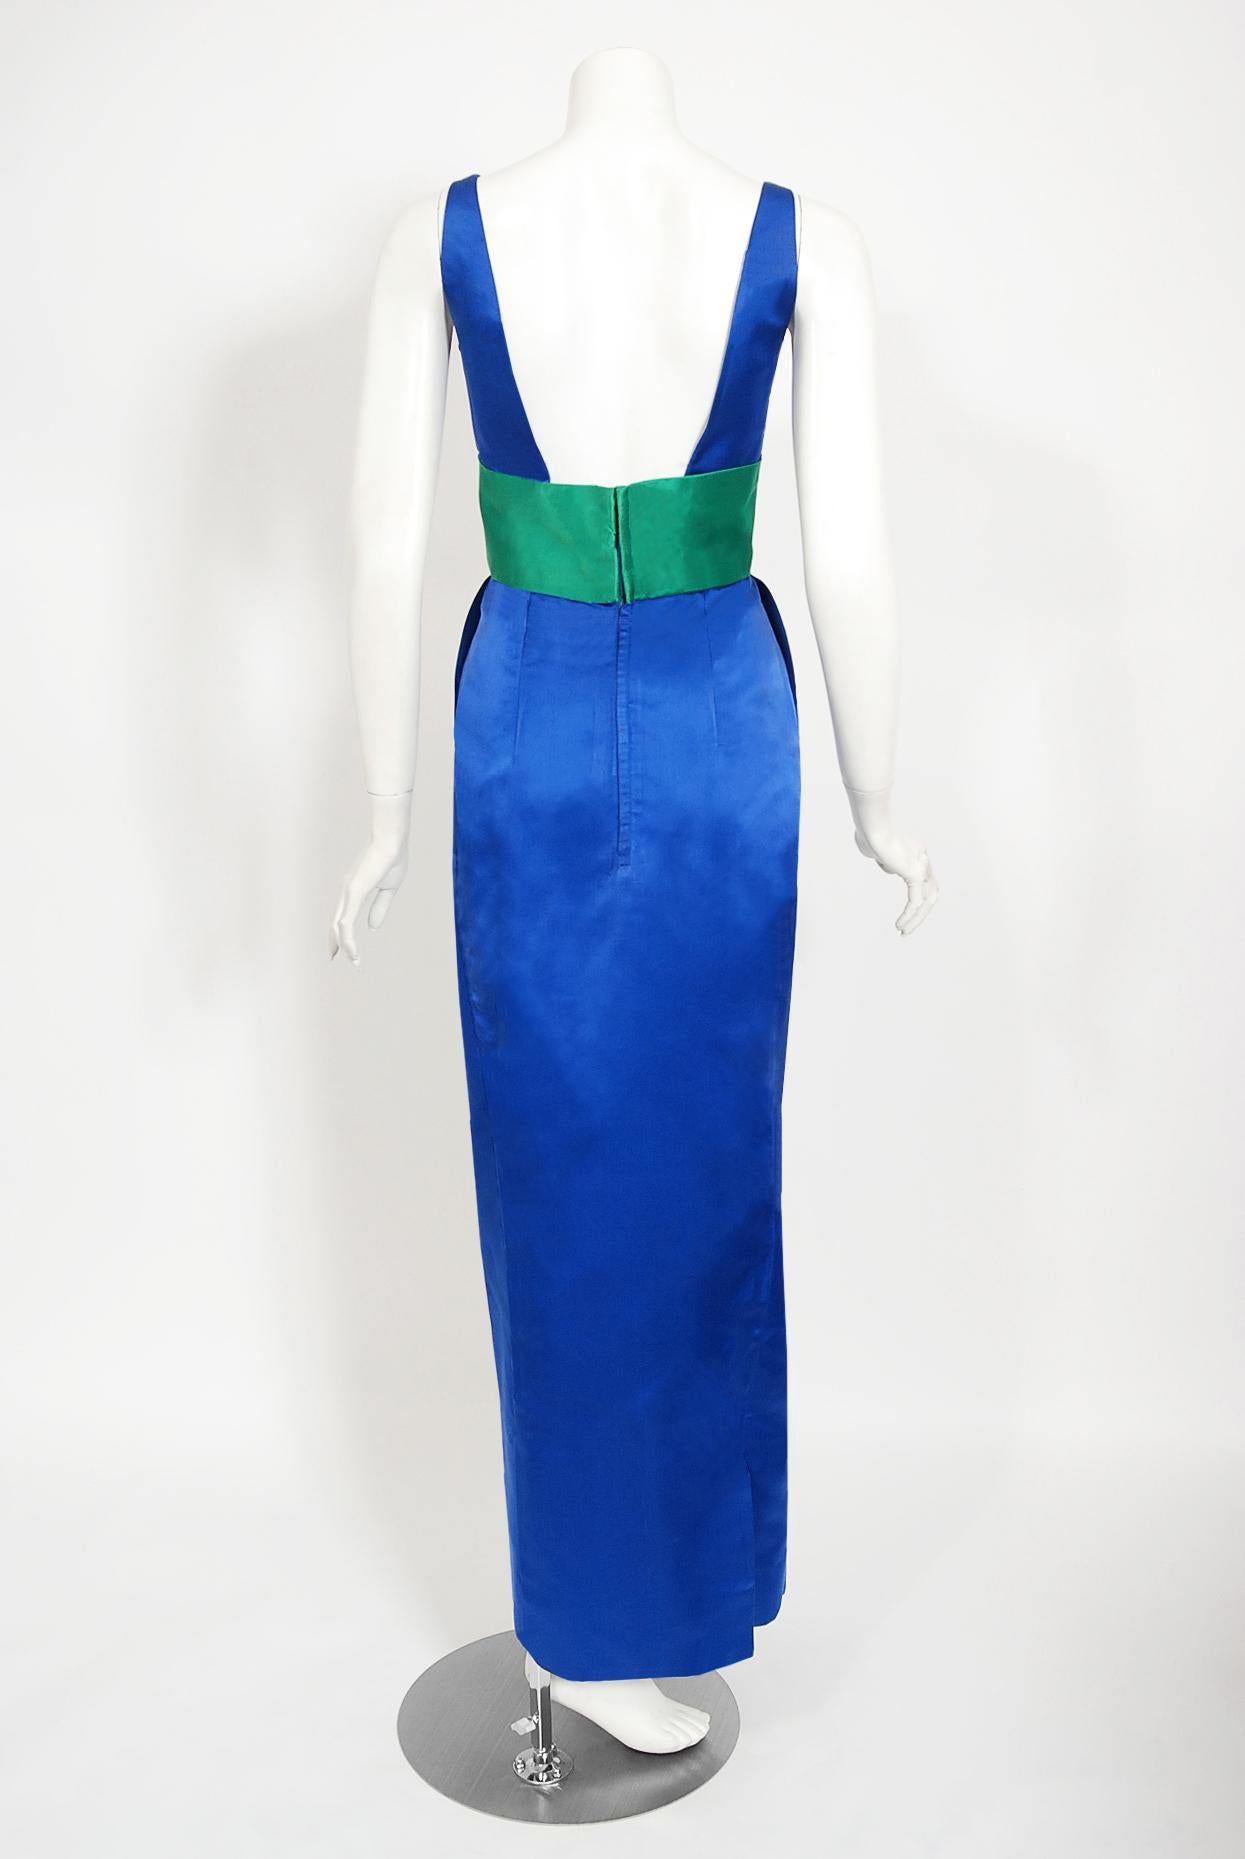 Vintage 1950s Oleg Cassini Sapphire Blue & Green Silk Sash Hourglass Fitted Gown 4